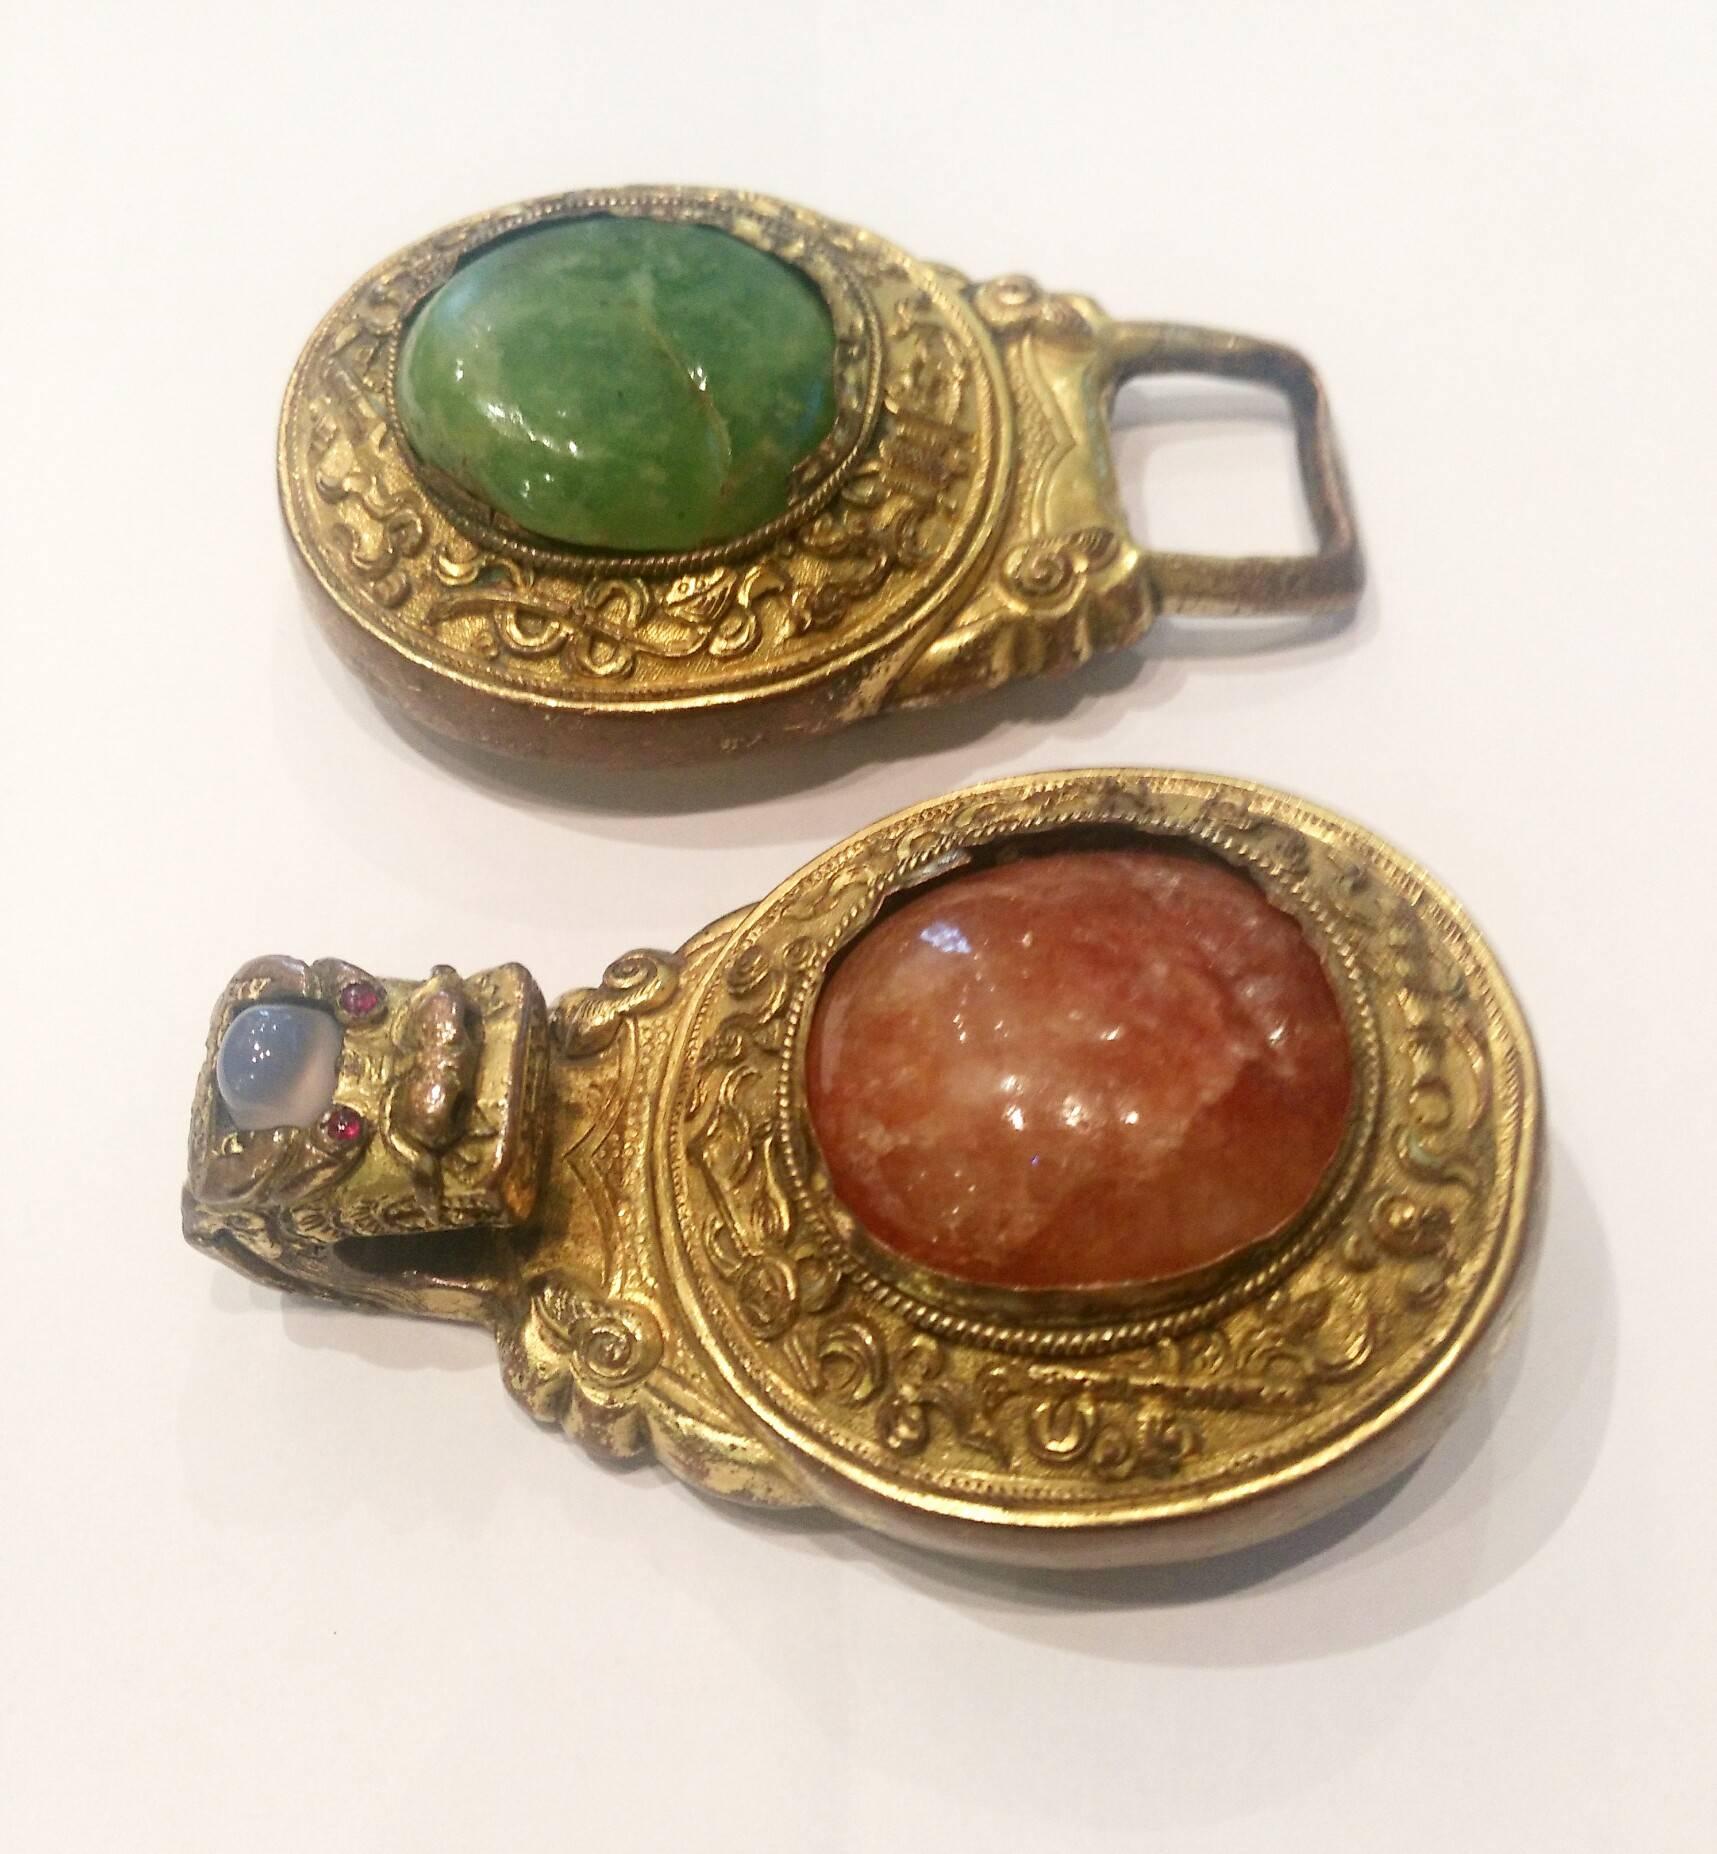 Hardstone inlaid gilt belt buckle.

Gilt bronze scrolled bases mounted with sunstone and sapphire on one side and pale green hardstone on the other.